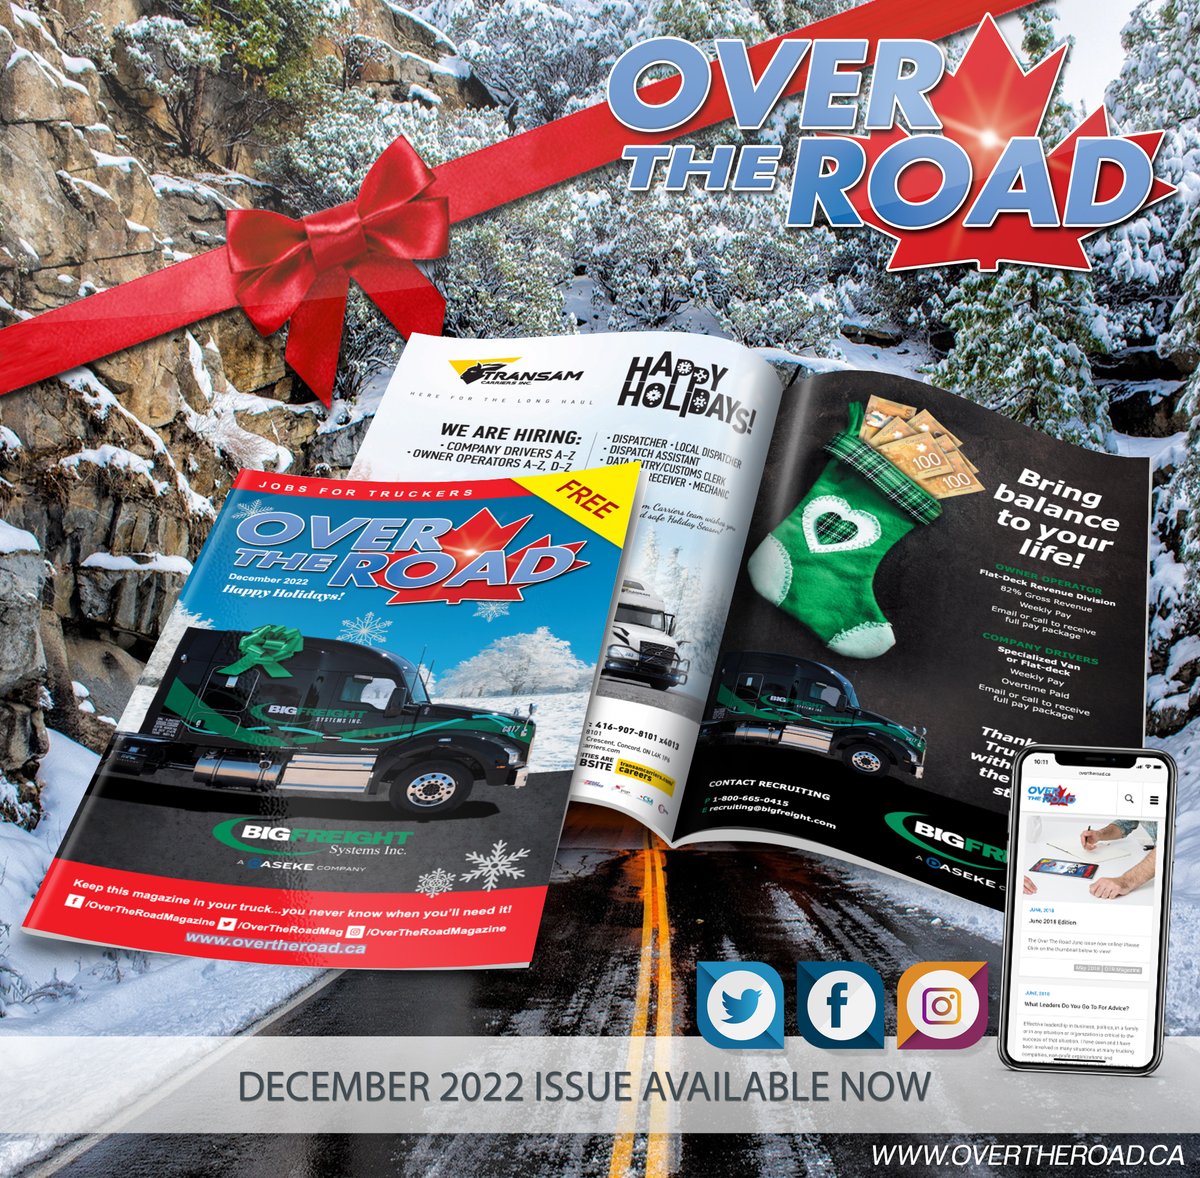 The Over The Road December 2022 issue is now online! ☃️
overtheroad.ca/view-december-…
#overtheroad #otrmagazine #jobsfortruckers #trucking #truckers #truckingcanada #transportation #truckdaily #transport #trucklife #fleetsafety #logistics  #December #Christmas #canadajobs #truckerlife